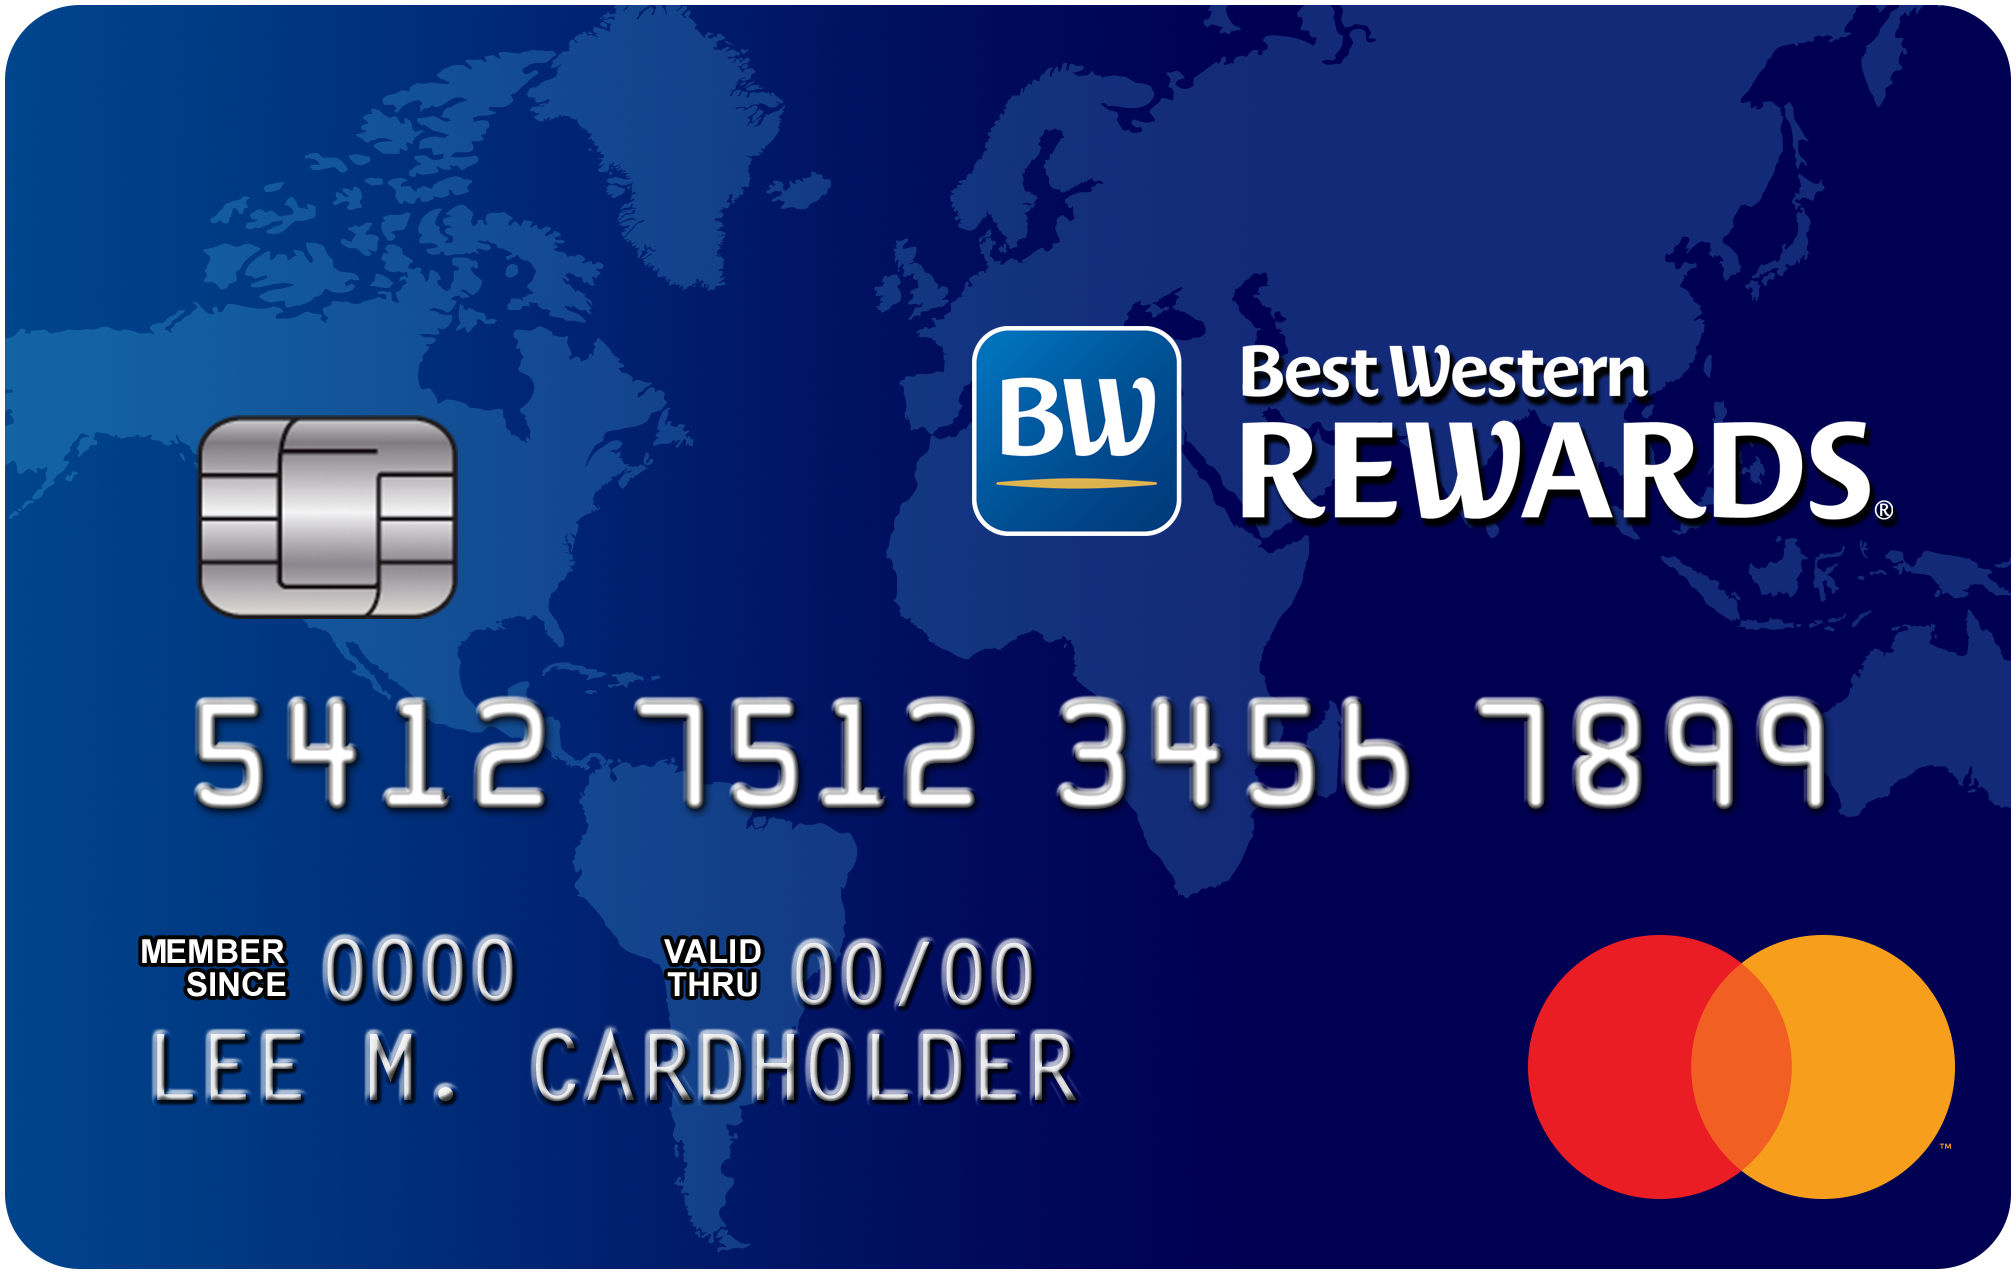 First Bankcard Best Western Rewards Credit Card Review - US Credit Card Guide